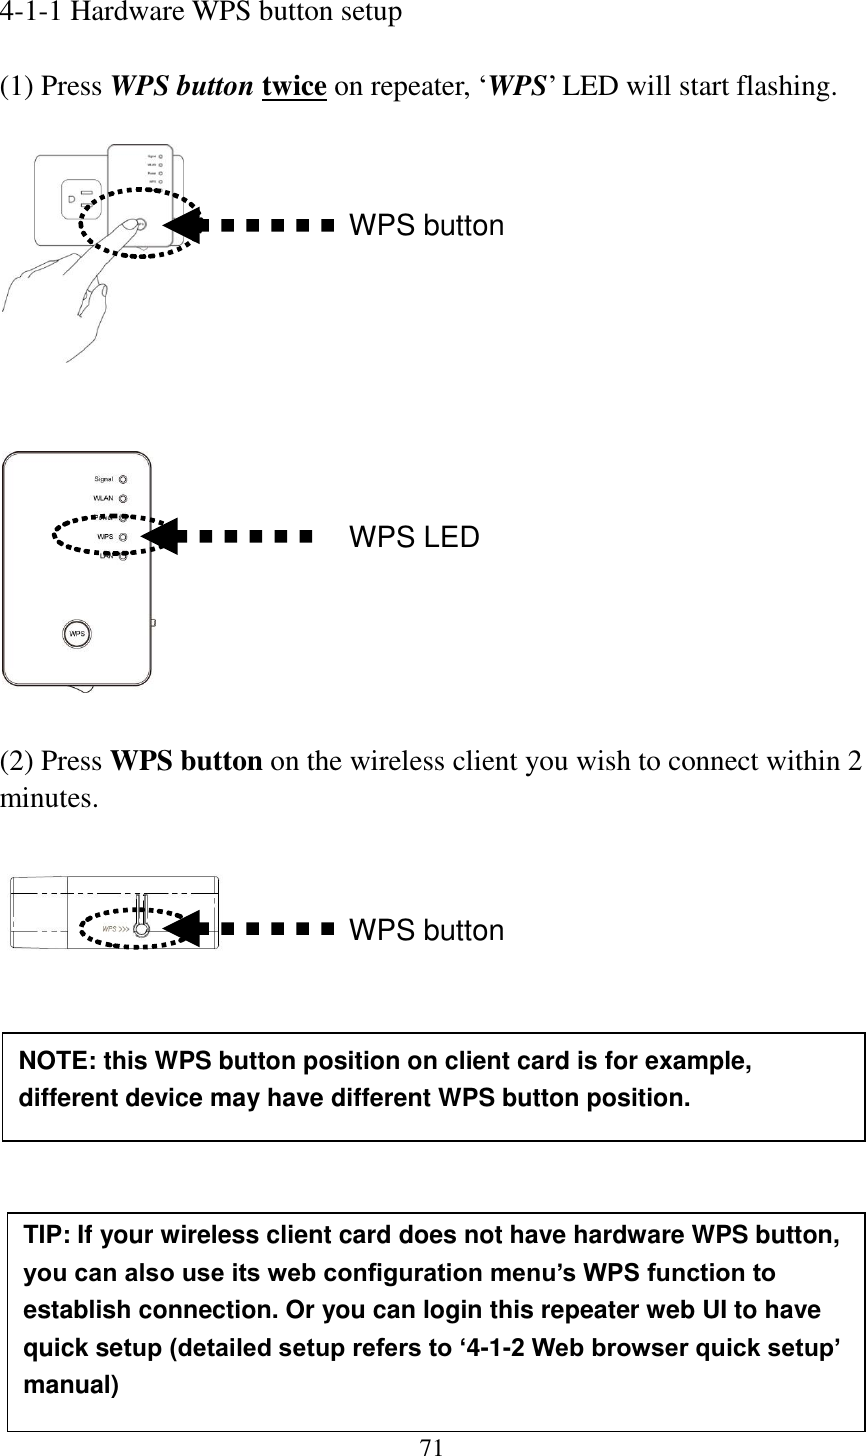 71  4-1-1 Hardware WPS button setup  (1) Press WPS button twice on repeater, „WPS‟ LED will start flashing.       (2) Press WPS button on the wireless client you wish to connect within 2 minutes.                 WPS LED WPS button NOTE: this WPS button position on client card is for example, different device may have different WPS button position. TIP: If your wireless client card does not have hardware WPS button, you can also use its web configuration menu’s WPS function to establish connection. Or you can login this repeater web UI to have quick setup (detailed setup refers to ‘4-1-2 Web browser quick setup’ manual) WPS button 